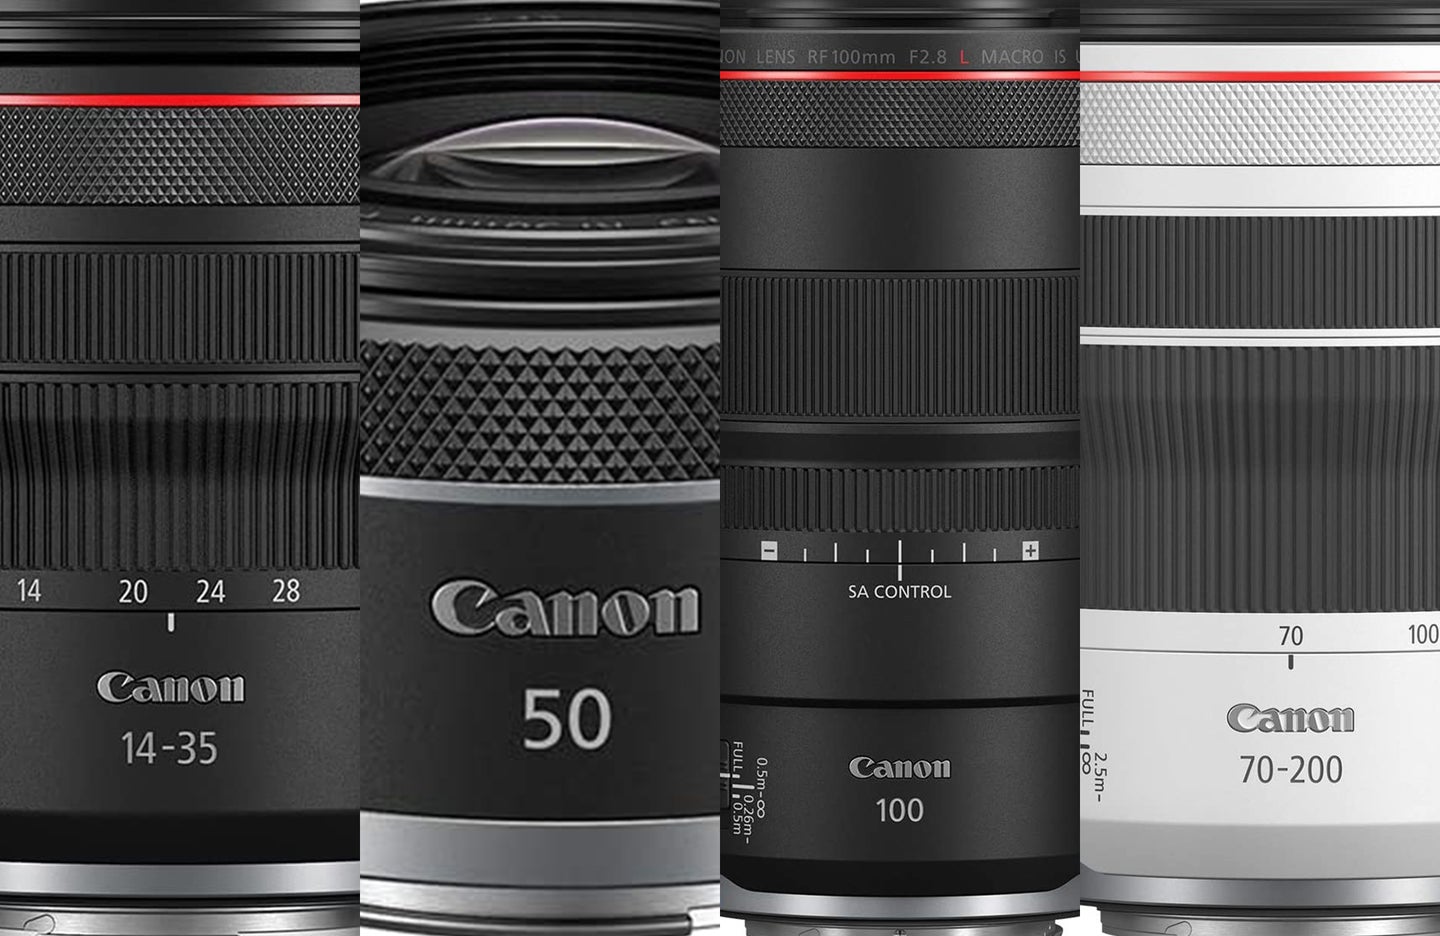 Canon lenses are on sale on Amazon right now.